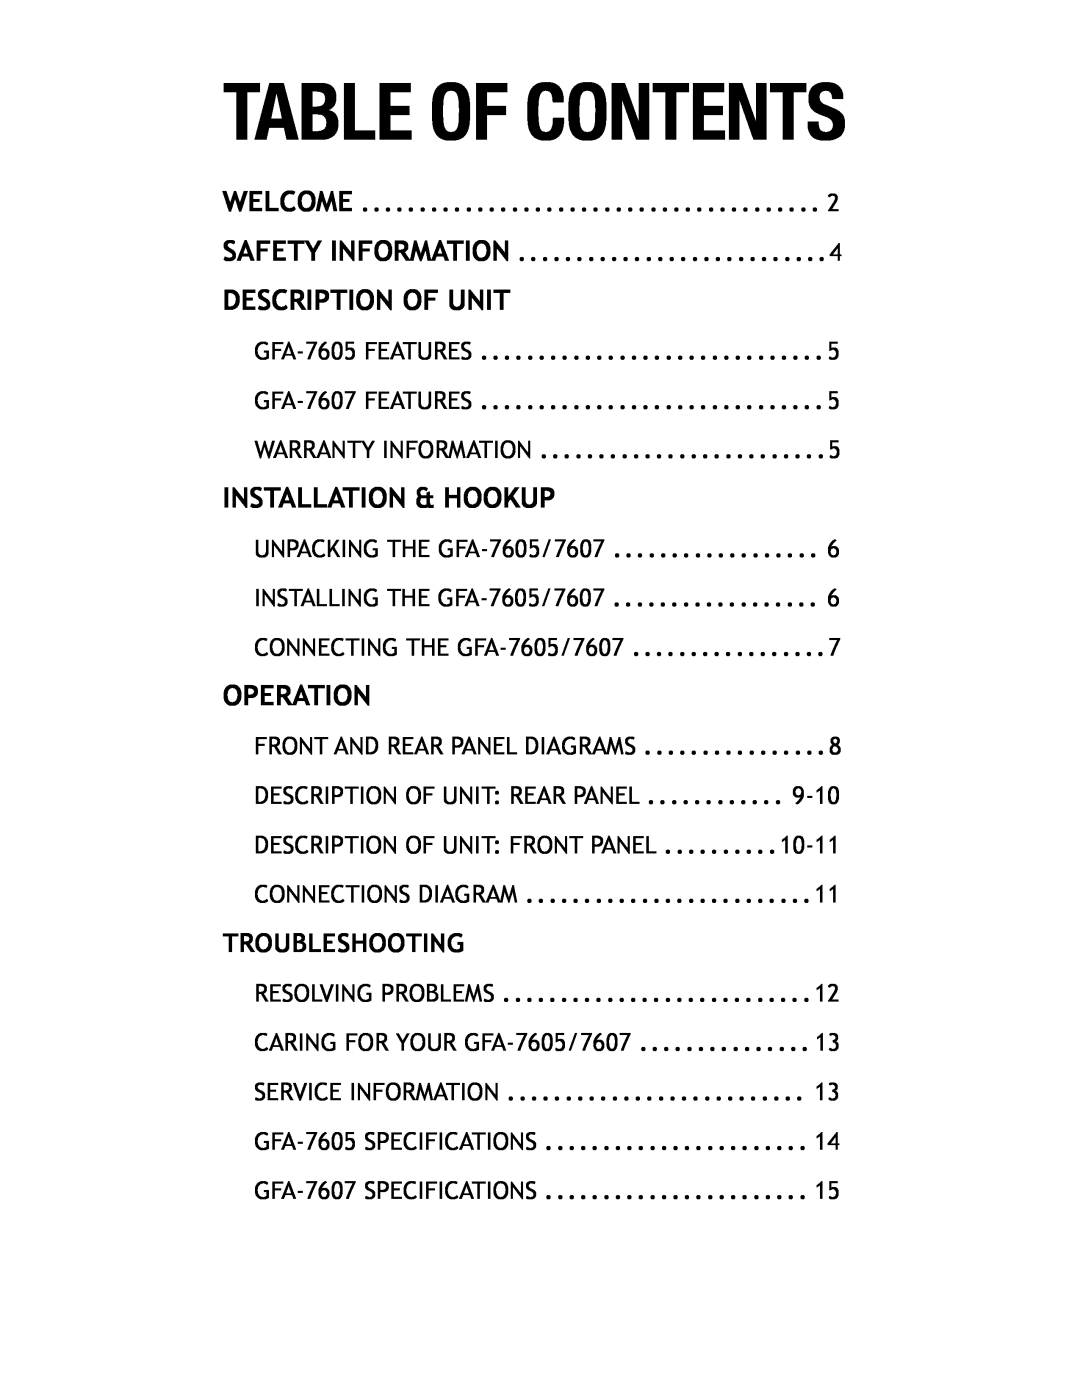 Adcom owner manual Table Of Contents, Troubleshooting, Welcome, Safety Information, GFA-7605FEATURES, GFA-7607FEATURES 